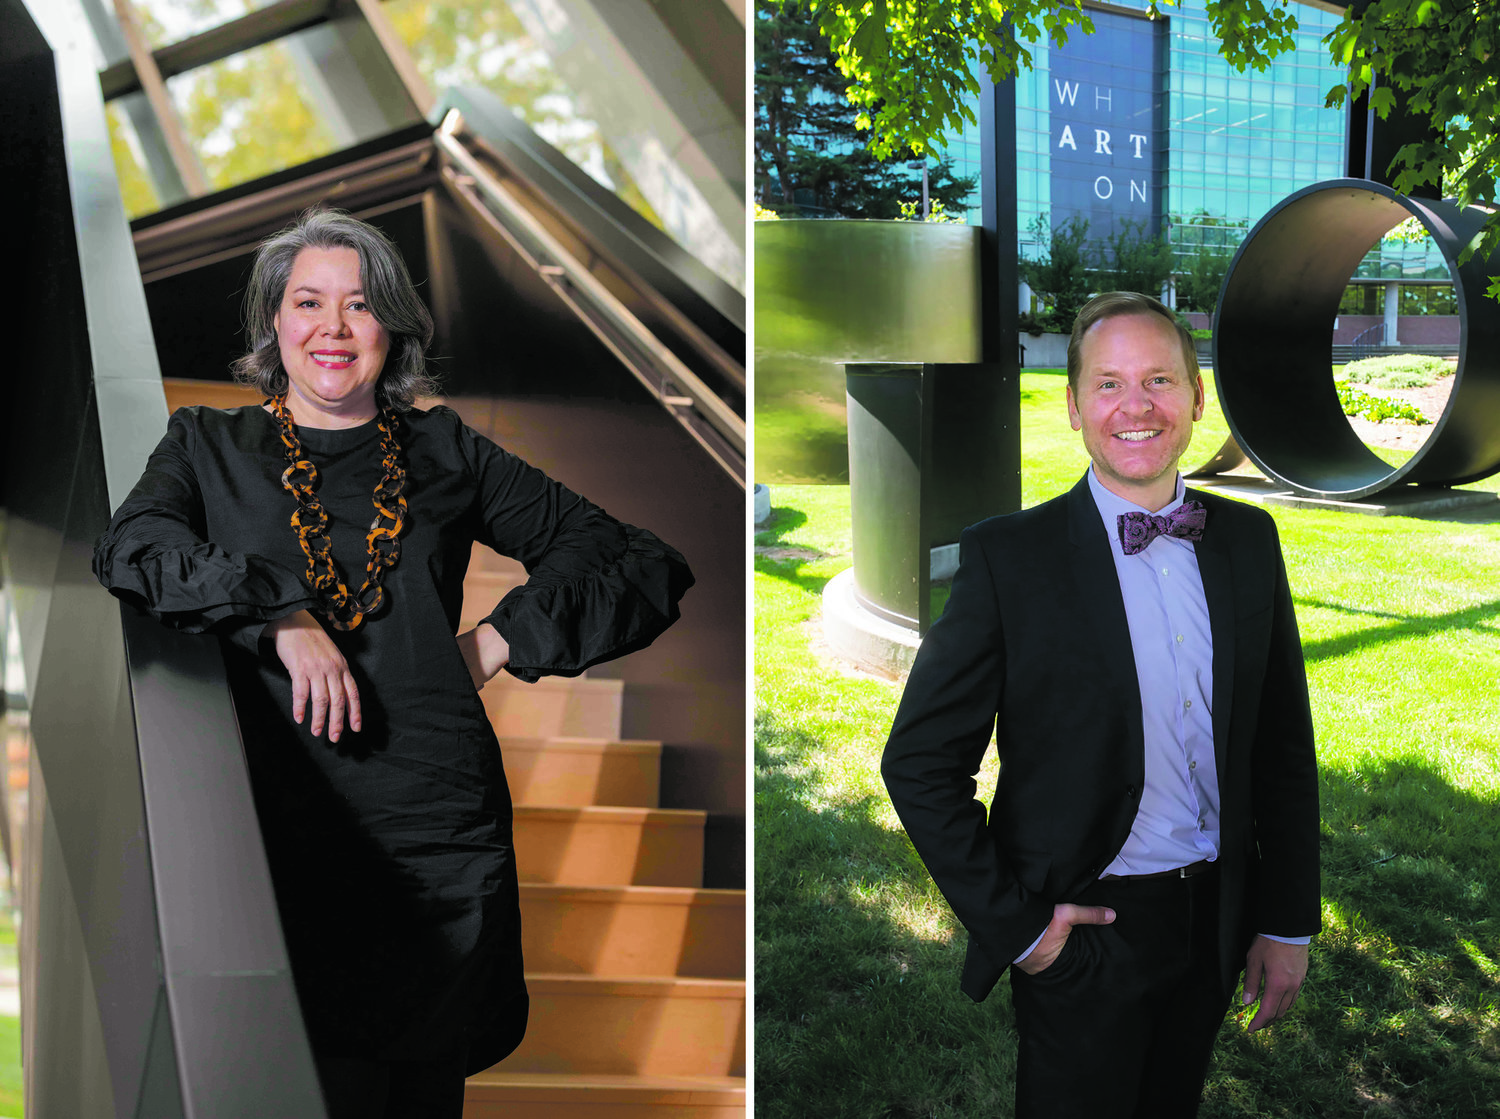 June marked big changes at MSU’s Wharton Center, where Eric Olmscheid took over as director, and the MSU Broad Art Museum, where Mónica Ramírez-Montagut left her post as director to lead New York’s Parrish Art Museum.